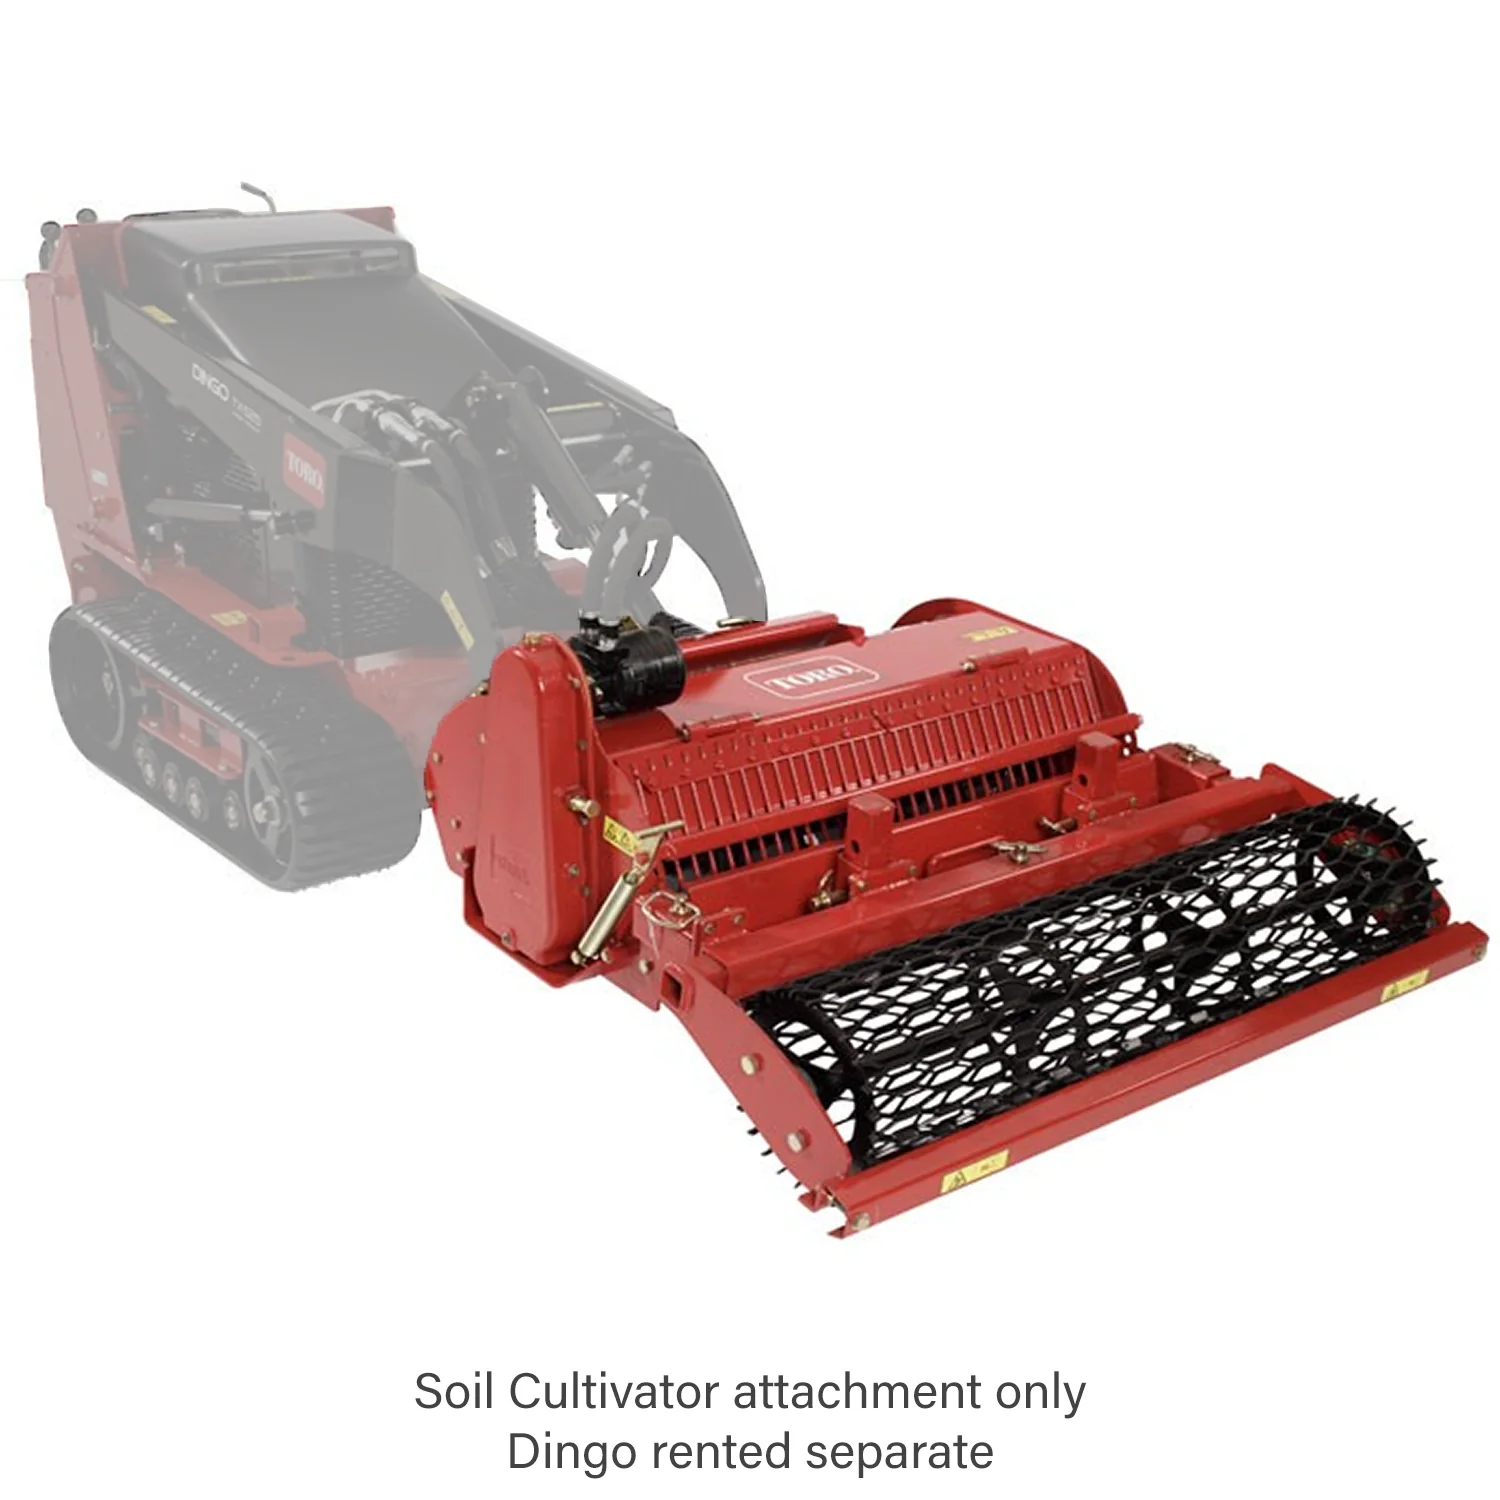 Soil Cultivator, Compact Utility Loaders